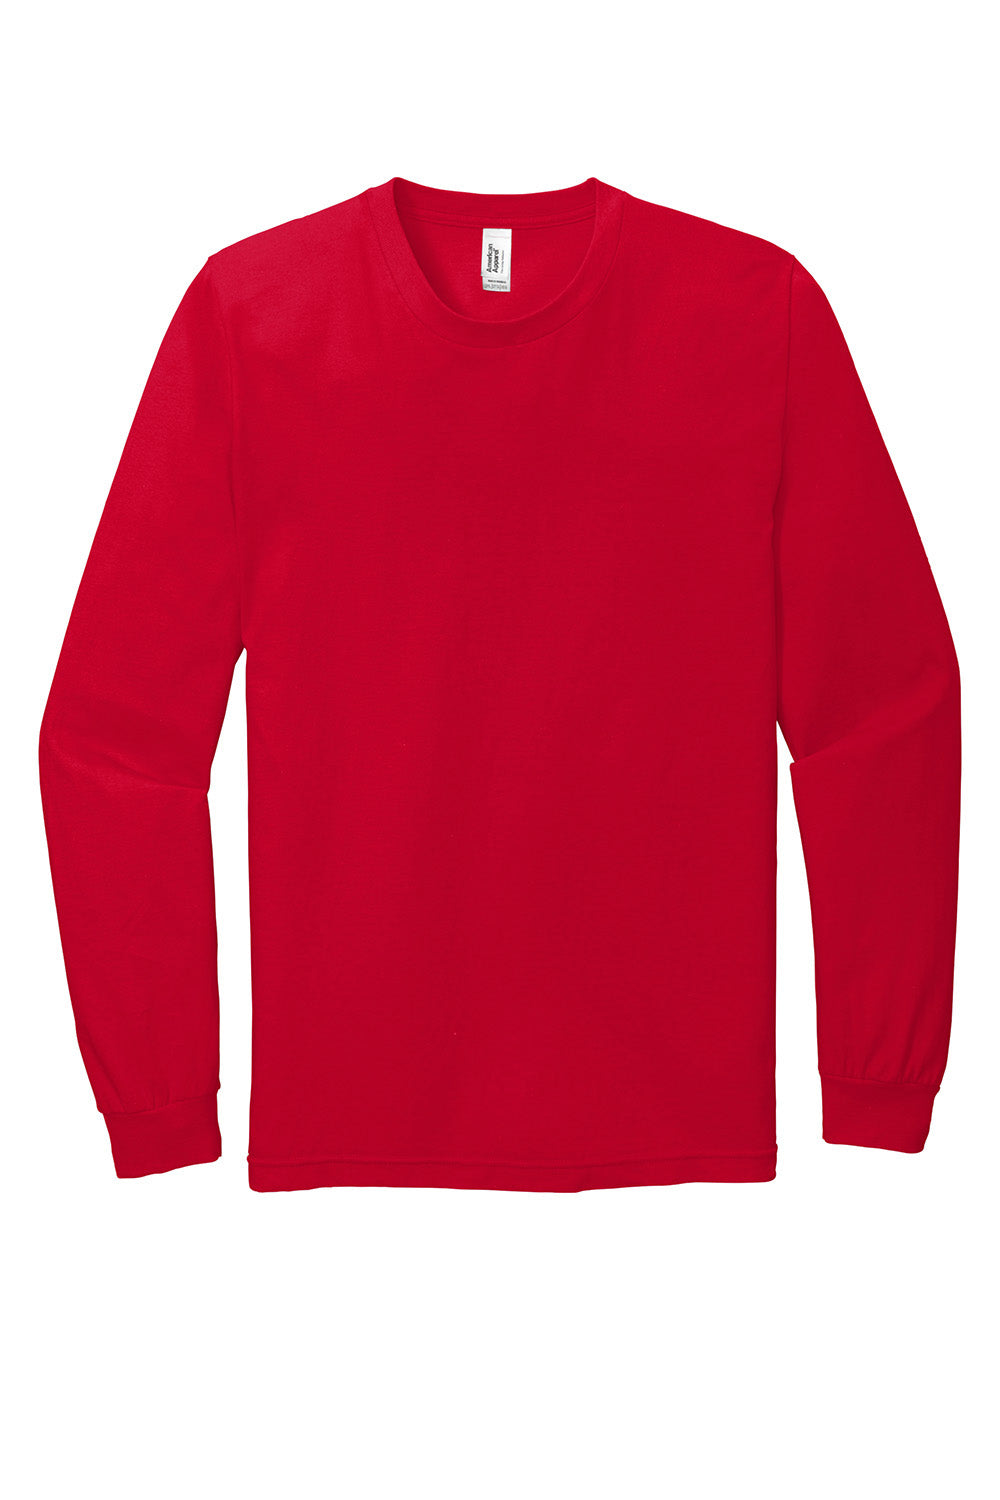 American Apparel 2007 Mens Fine Jersey Long Sleeve Crewneck T-Shirt Red Flat Front